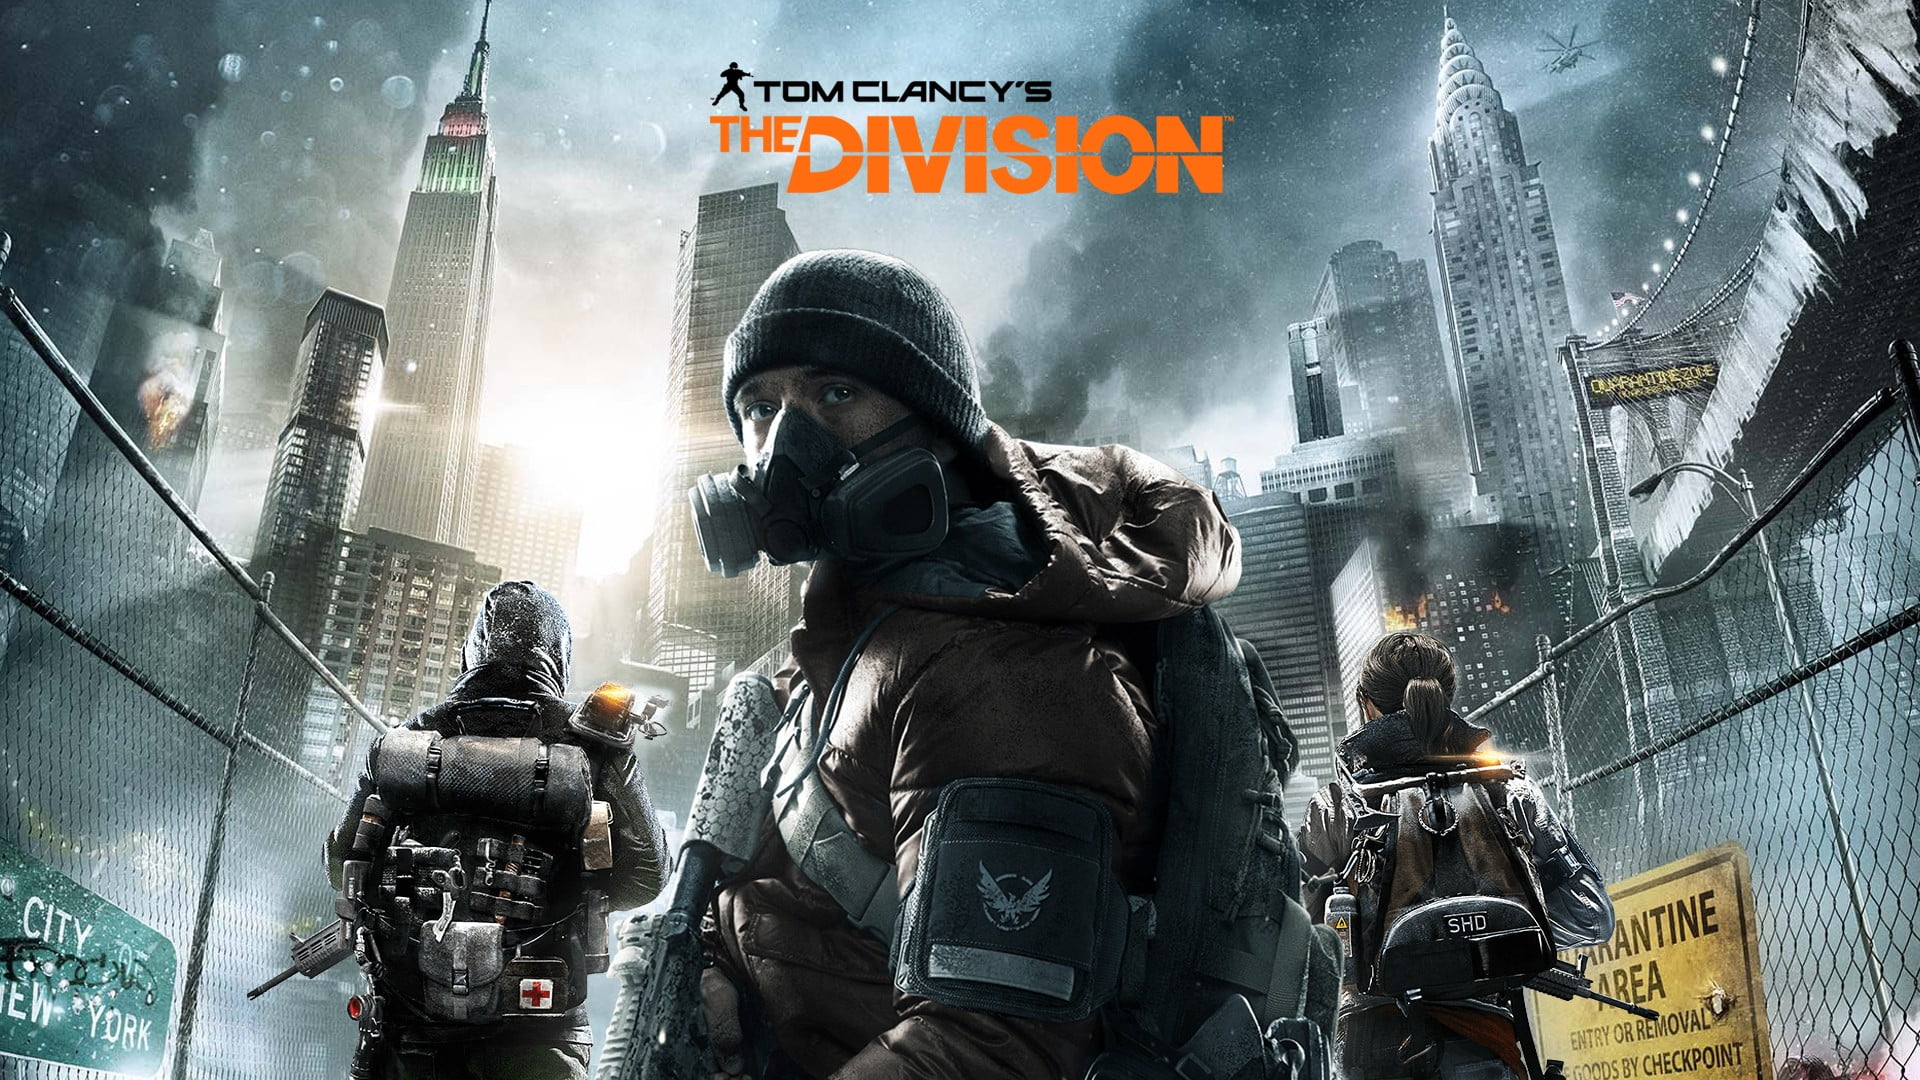 Tom Clancy's The Division game poster, video games, architecture